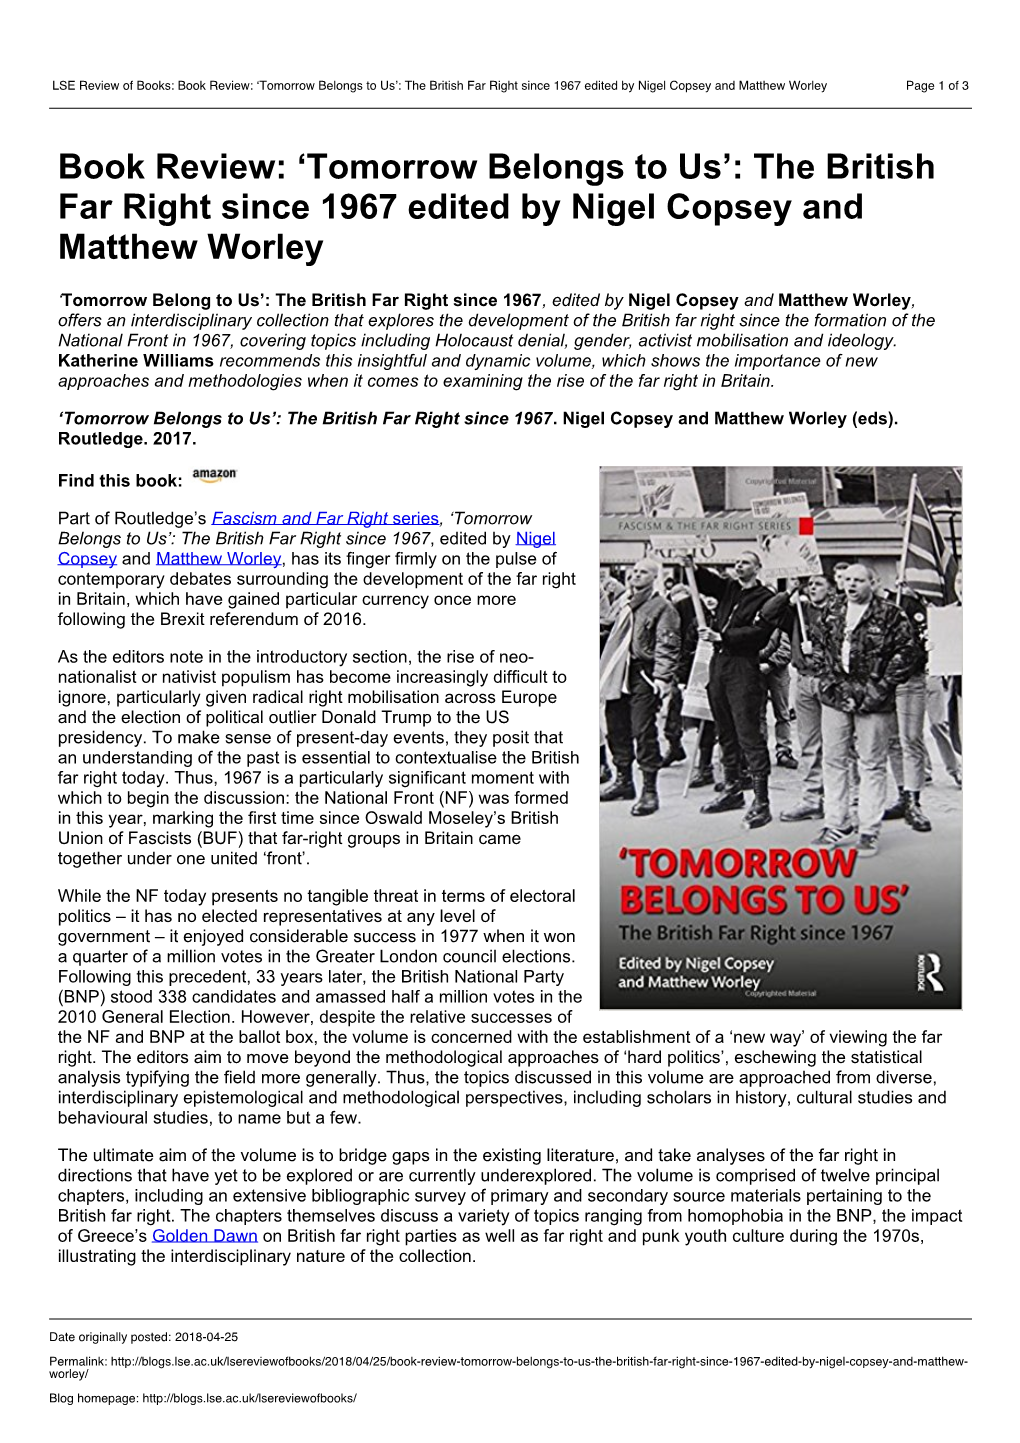 The British Far Right Since 1967 Edited by Nigel Copsey and Matthew Worley Page 1 of 3